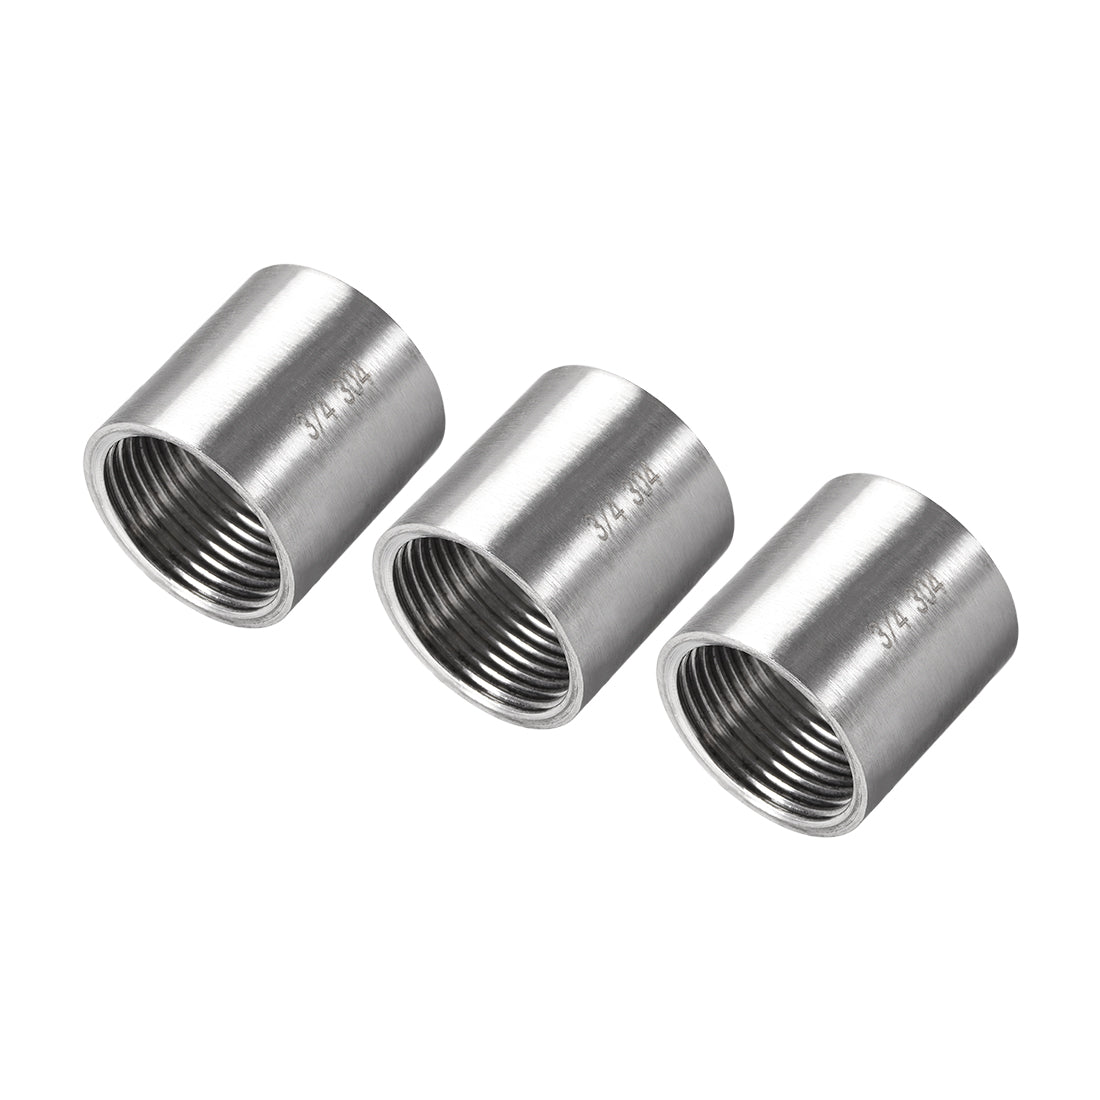 uxcell Uxcell Stainless Steel 304 Cast Pipe Fittings Coupling 3/4 x 3/4 G Female 3pcs